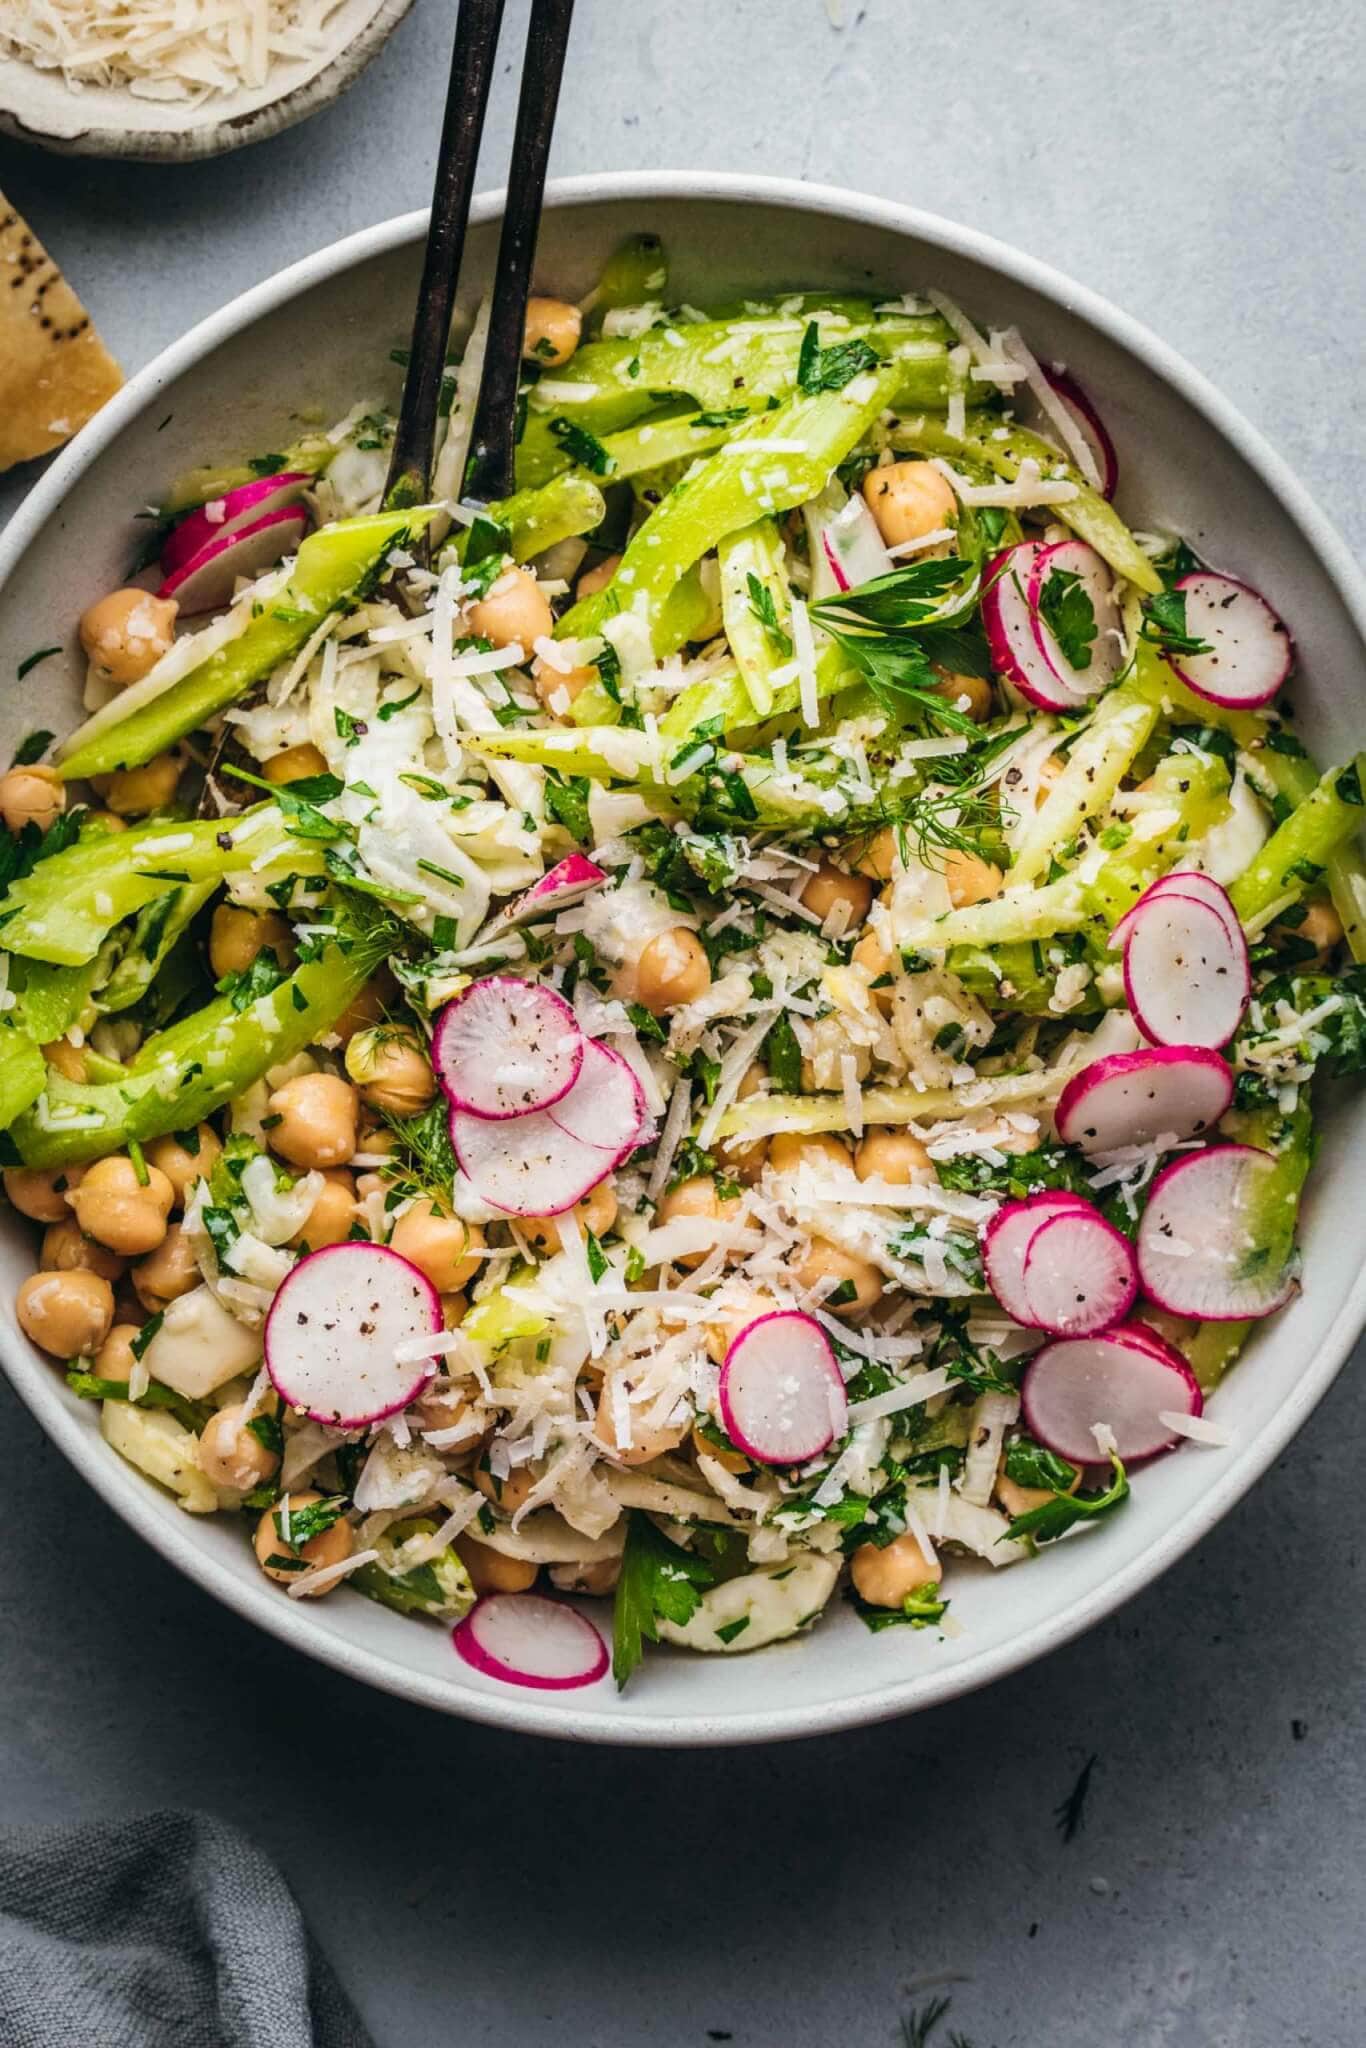 Fennel Salad Recipe with Chickpeas - Platings + Pairings